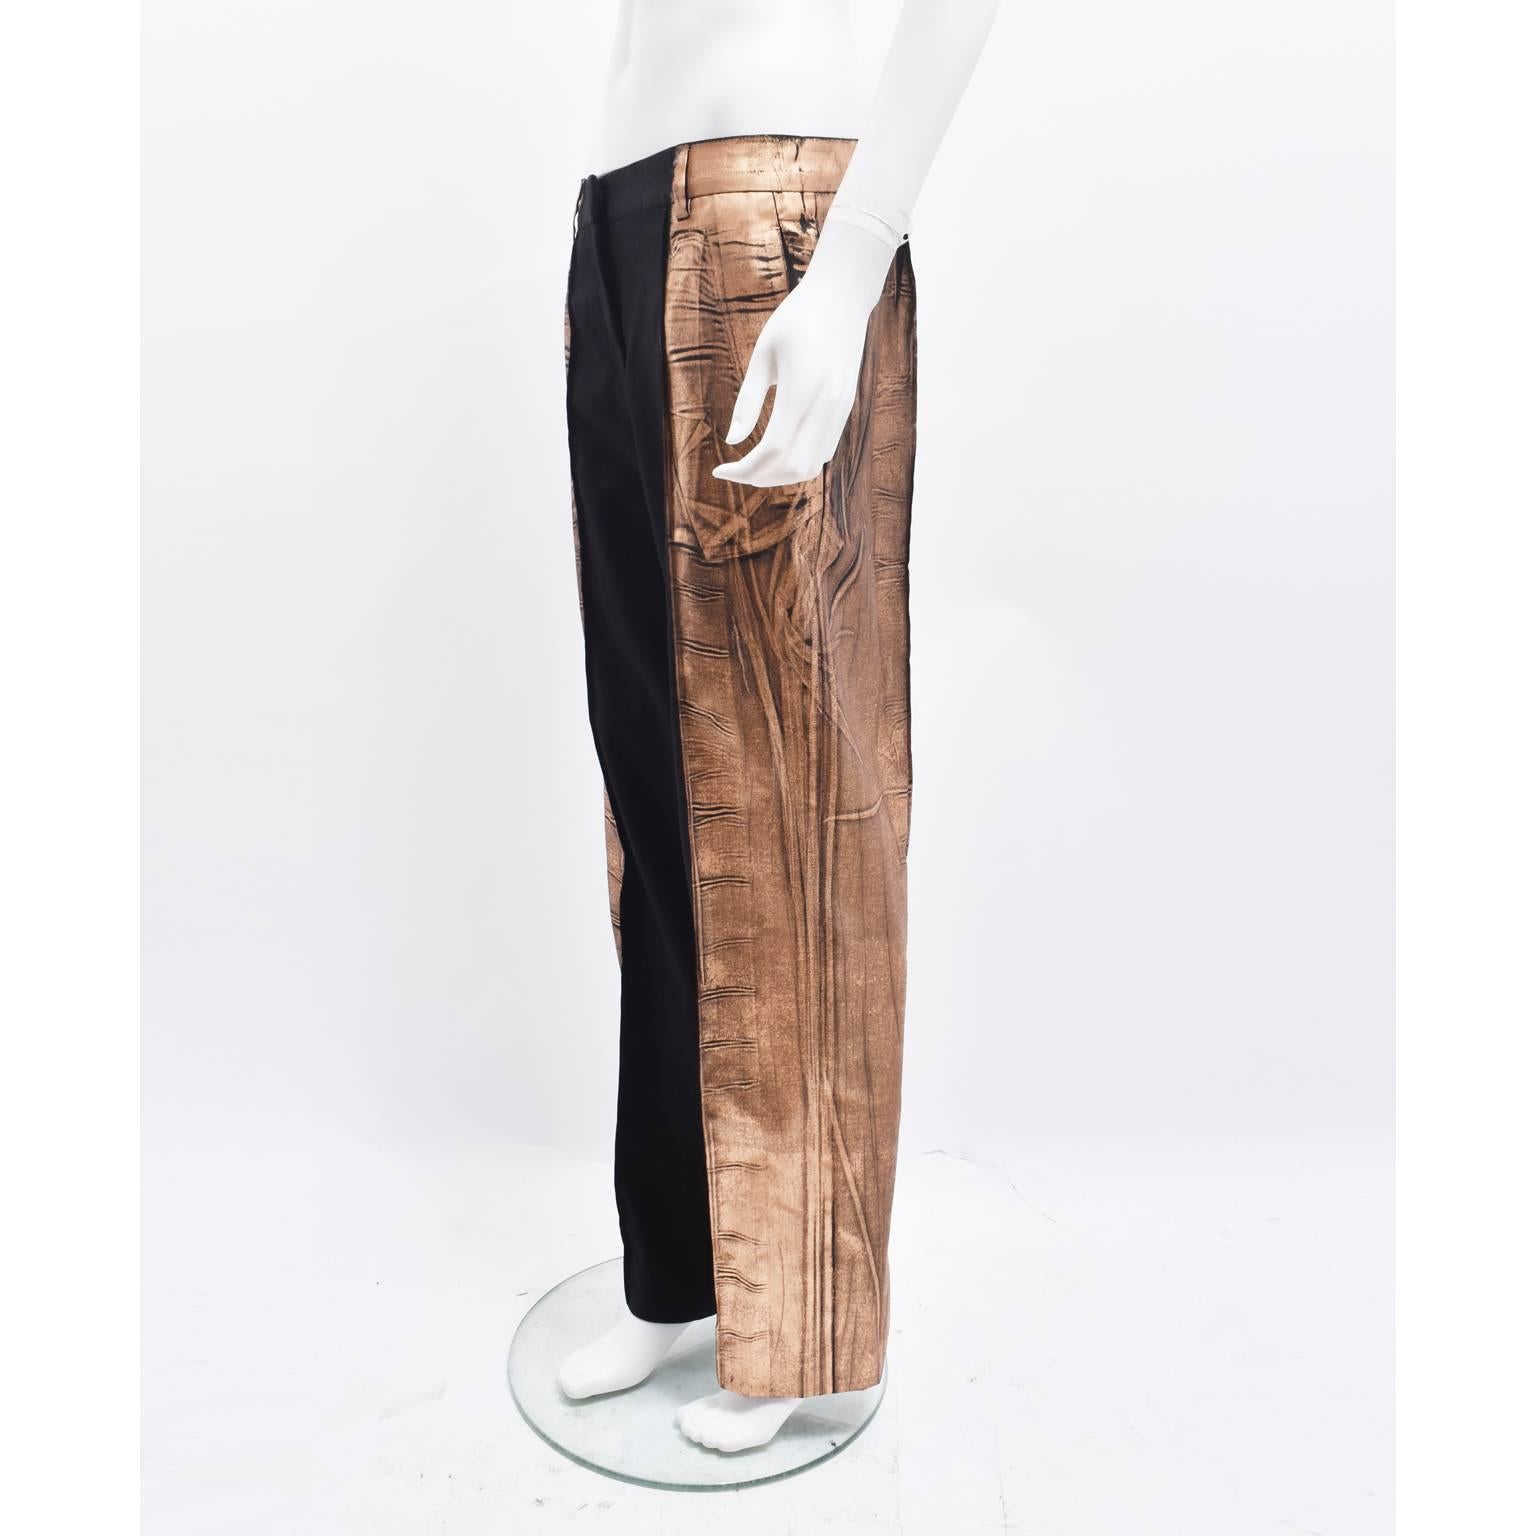 
A pair of Martin Margiela black trousers with metallic bronze ‘paint’ decorating the sides. The trousers have a simple, straight cut that sit on the waist with a regular fit. The Margiela twist comes from the metallic bronze embellishment that